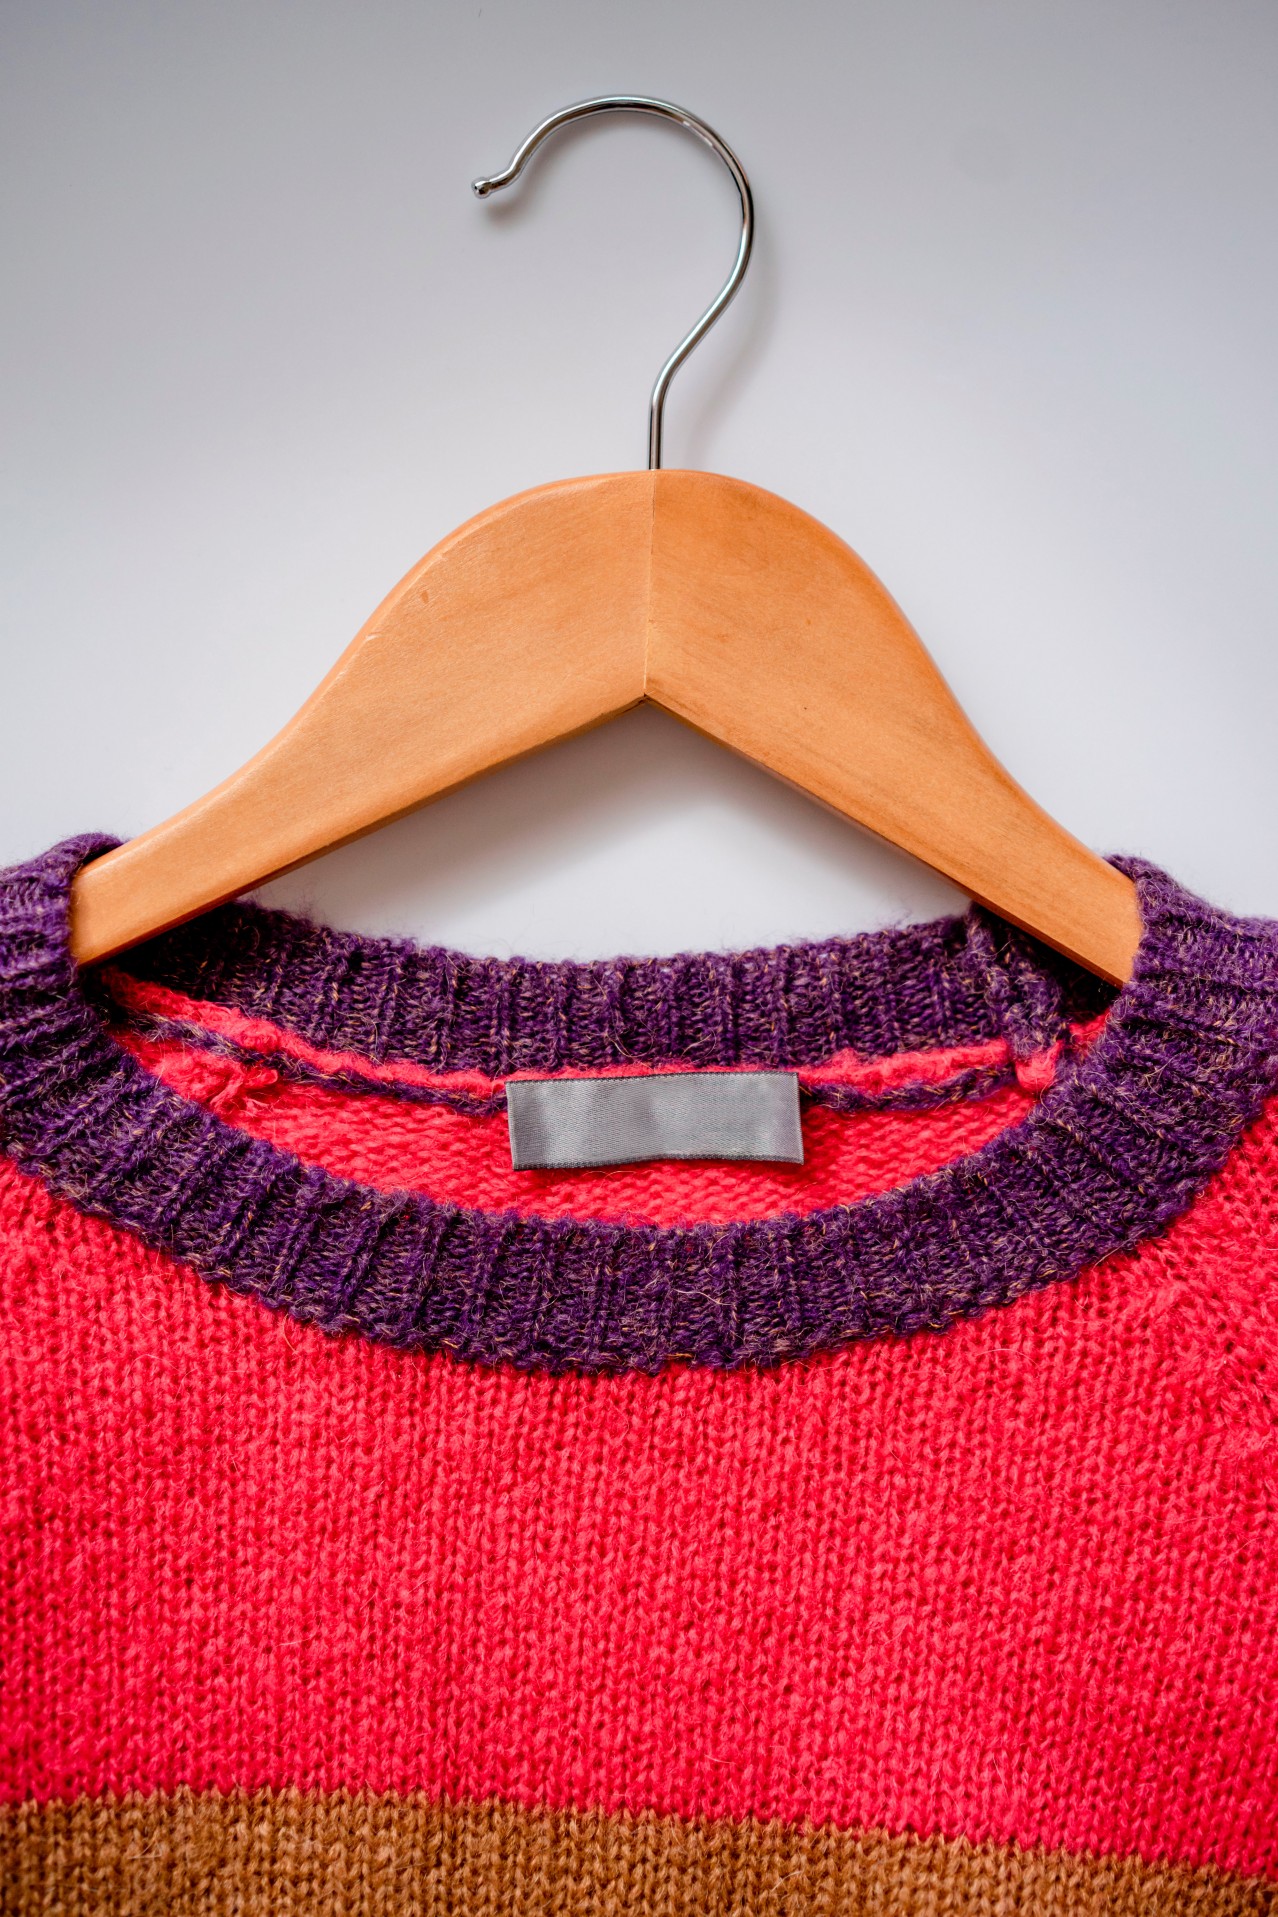 Sweater on the wooden hanger